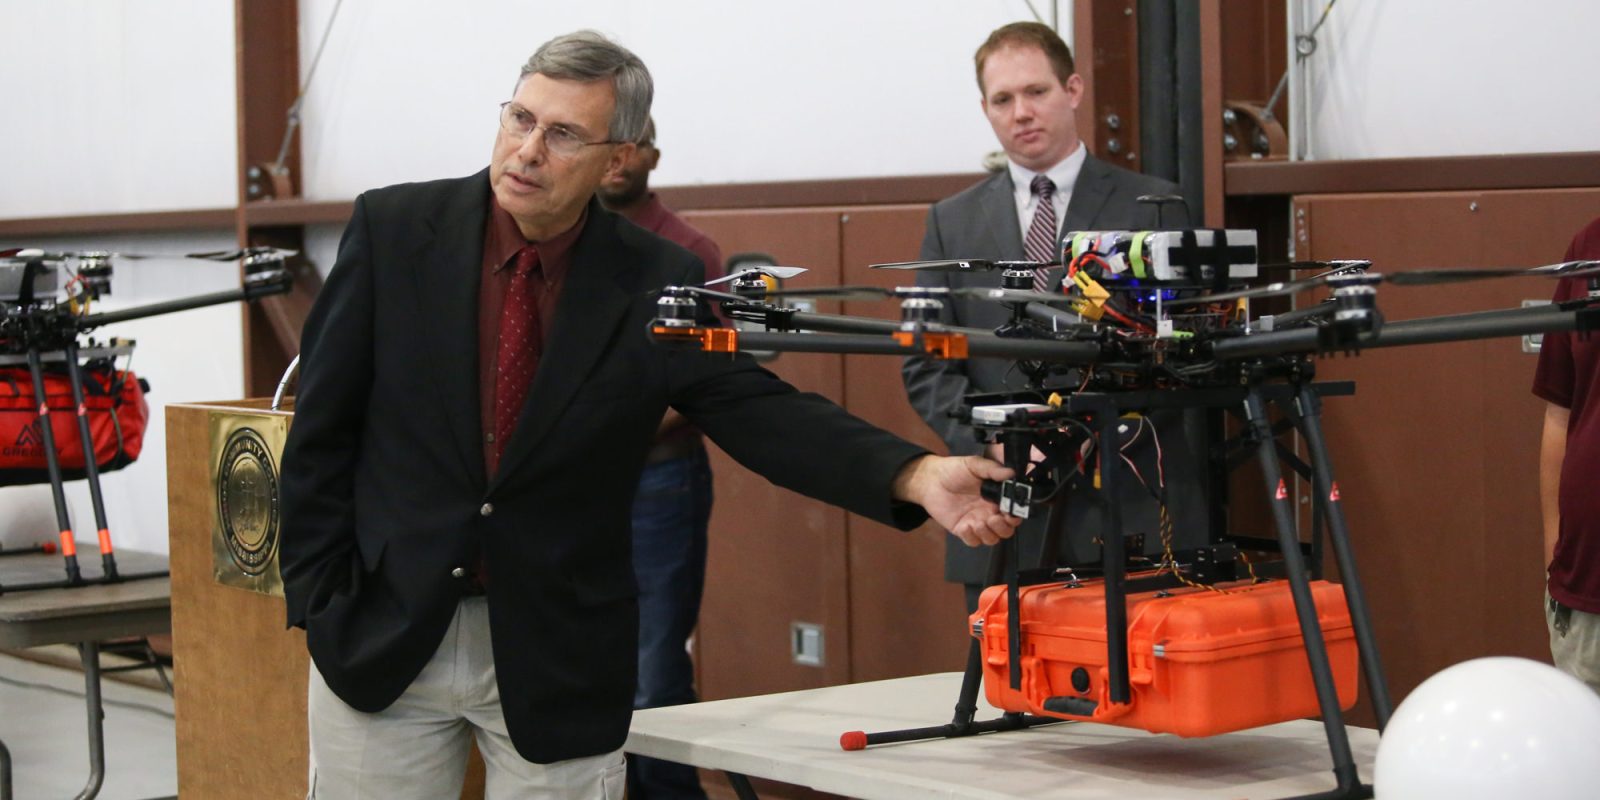 Dennis Lott, director of the Unmanned Aerial Systems program at Hinds Community College, points out a component on a UAV equipped with a telemedical package during a presentation Dec. 6 at John Bell Williams Airport to launch the Telemedical Drone Project. (Hinds Community College/April Garon)